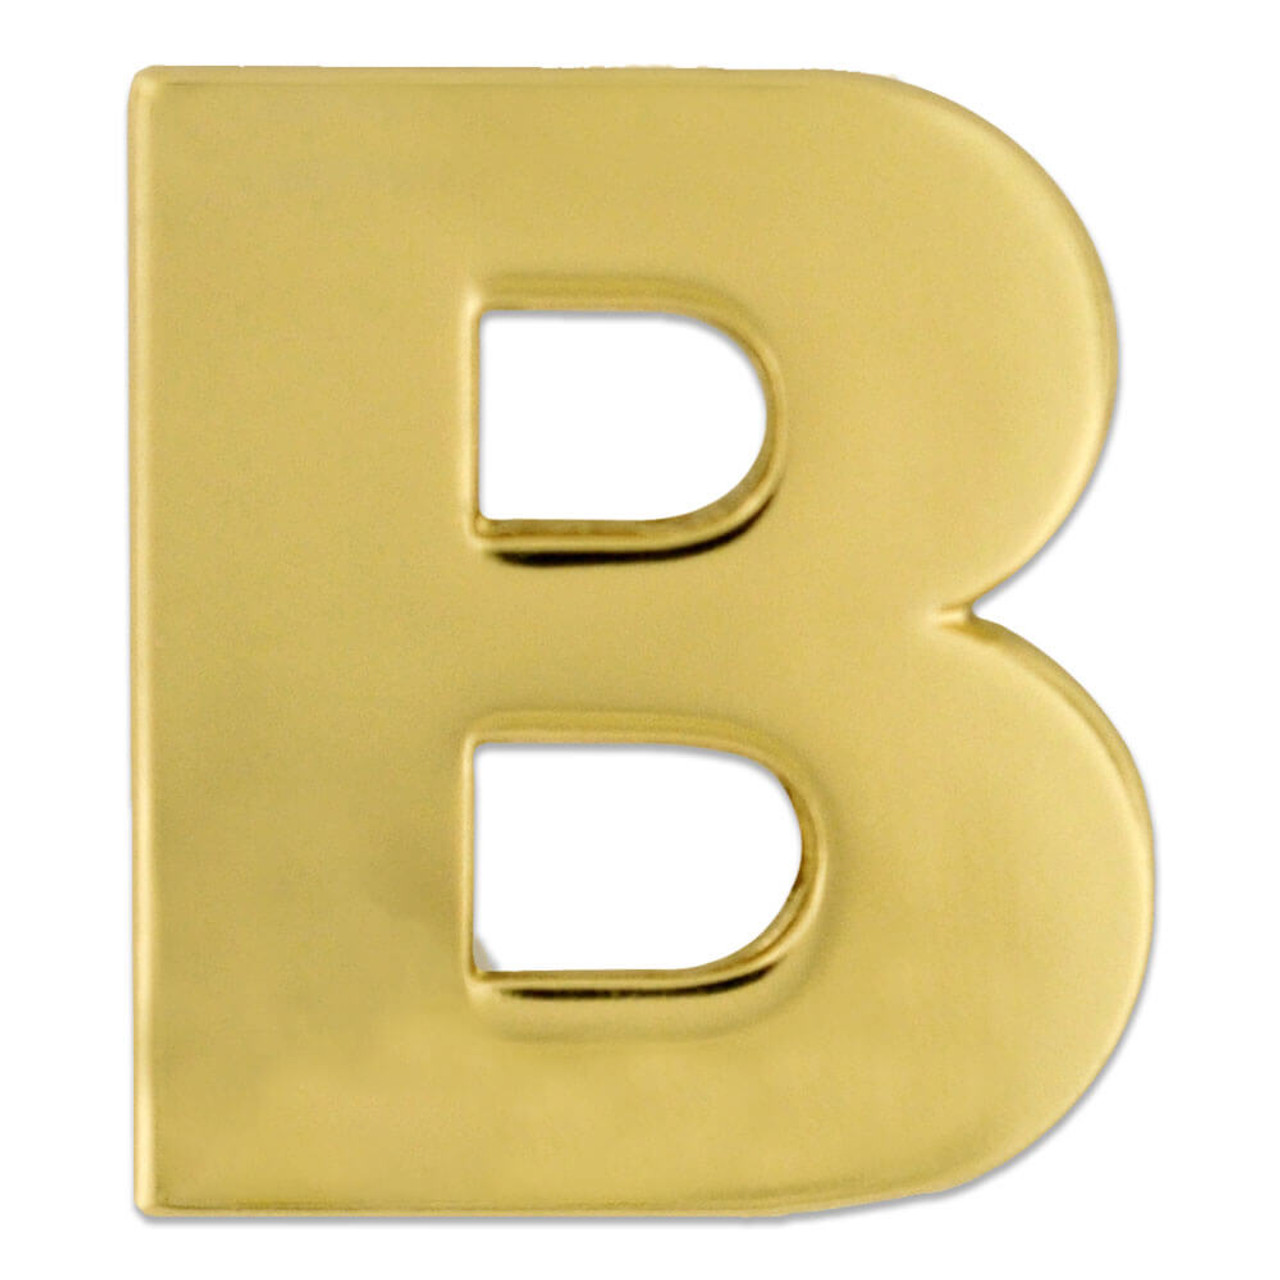 Gold B Pin | Gold | Initial Pins by PinMart